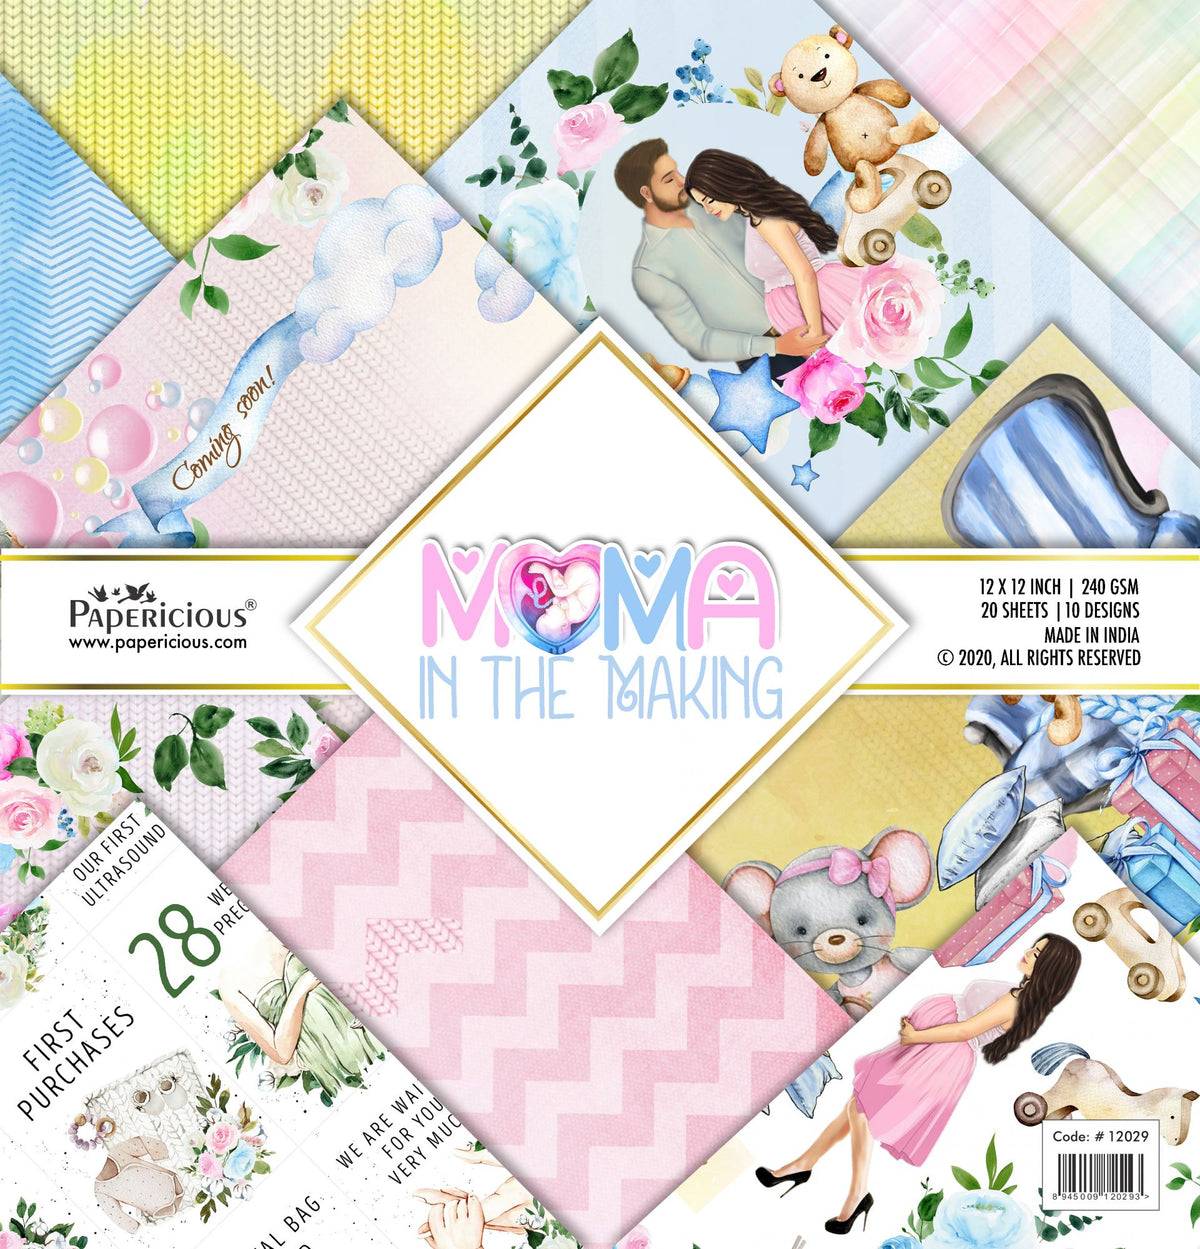 PAPERICIOUS - Mama in the Making -  Designer Pattern Printed Scrapbook Papers 12x12 inch  / 20 sheets